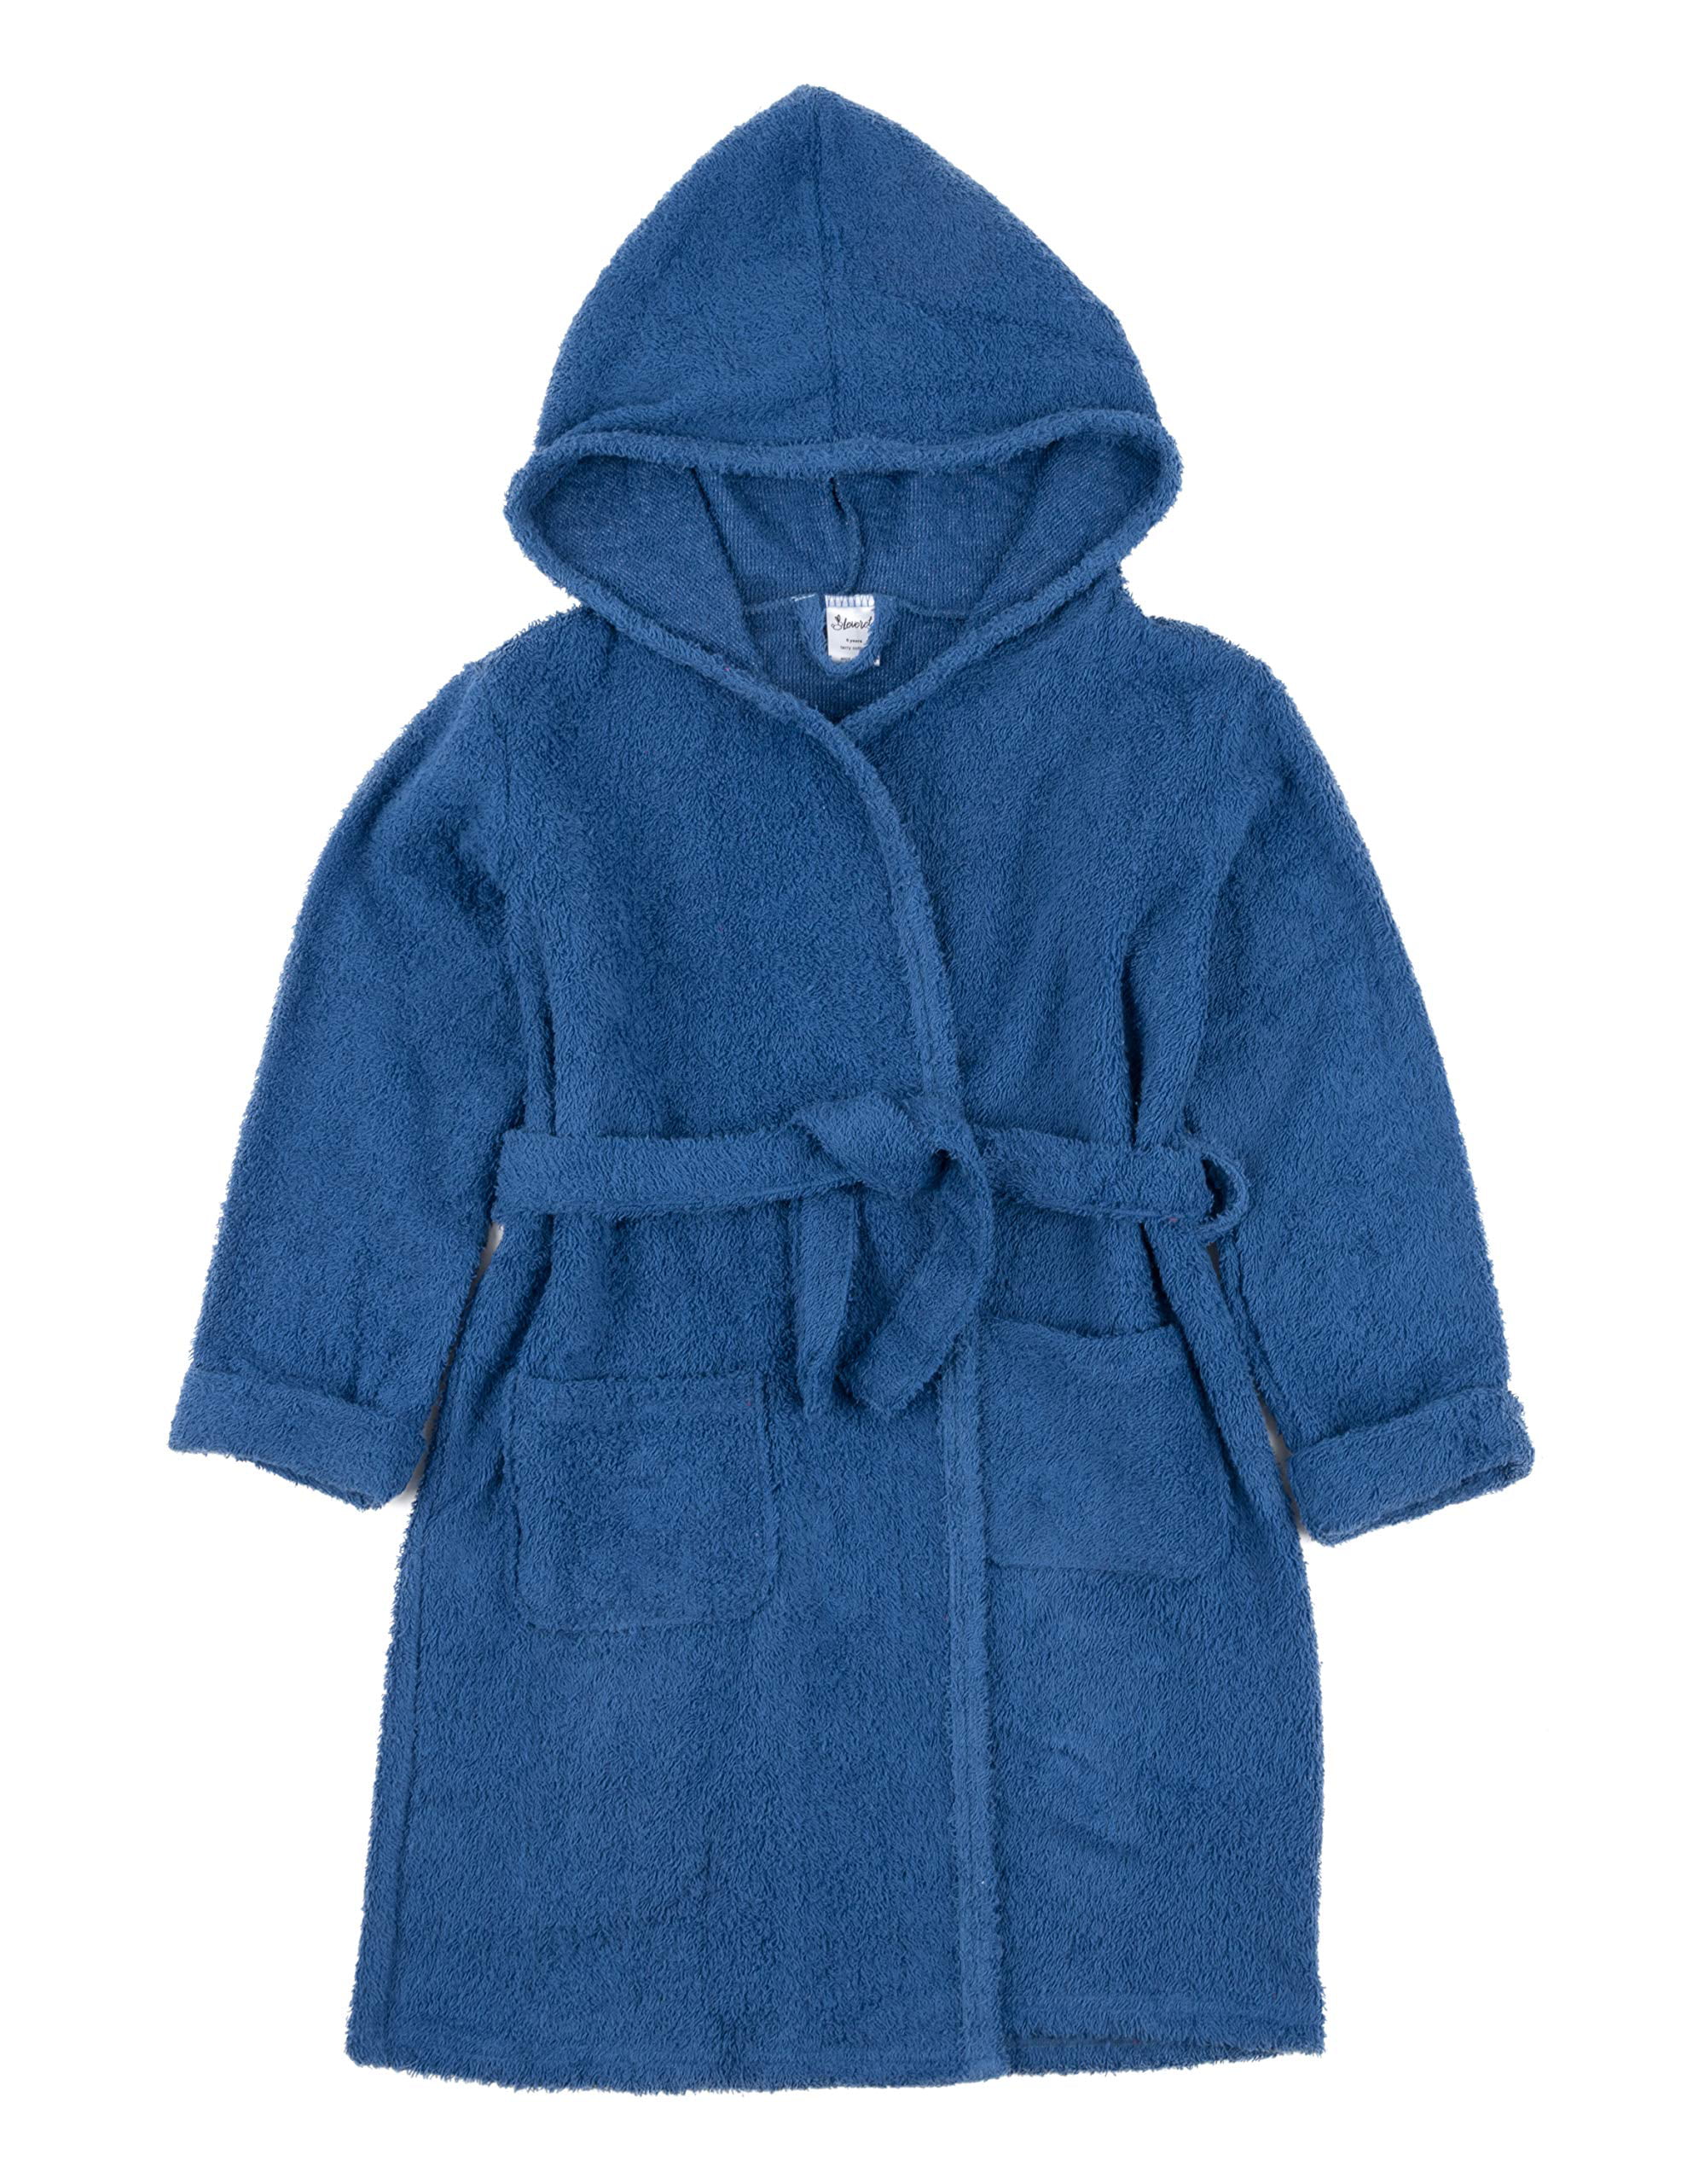 Variety of Colors Leveret Kids Bathobe Boys Girls Terry Cotton Hooded Robe Size 12 Months-16 Years 